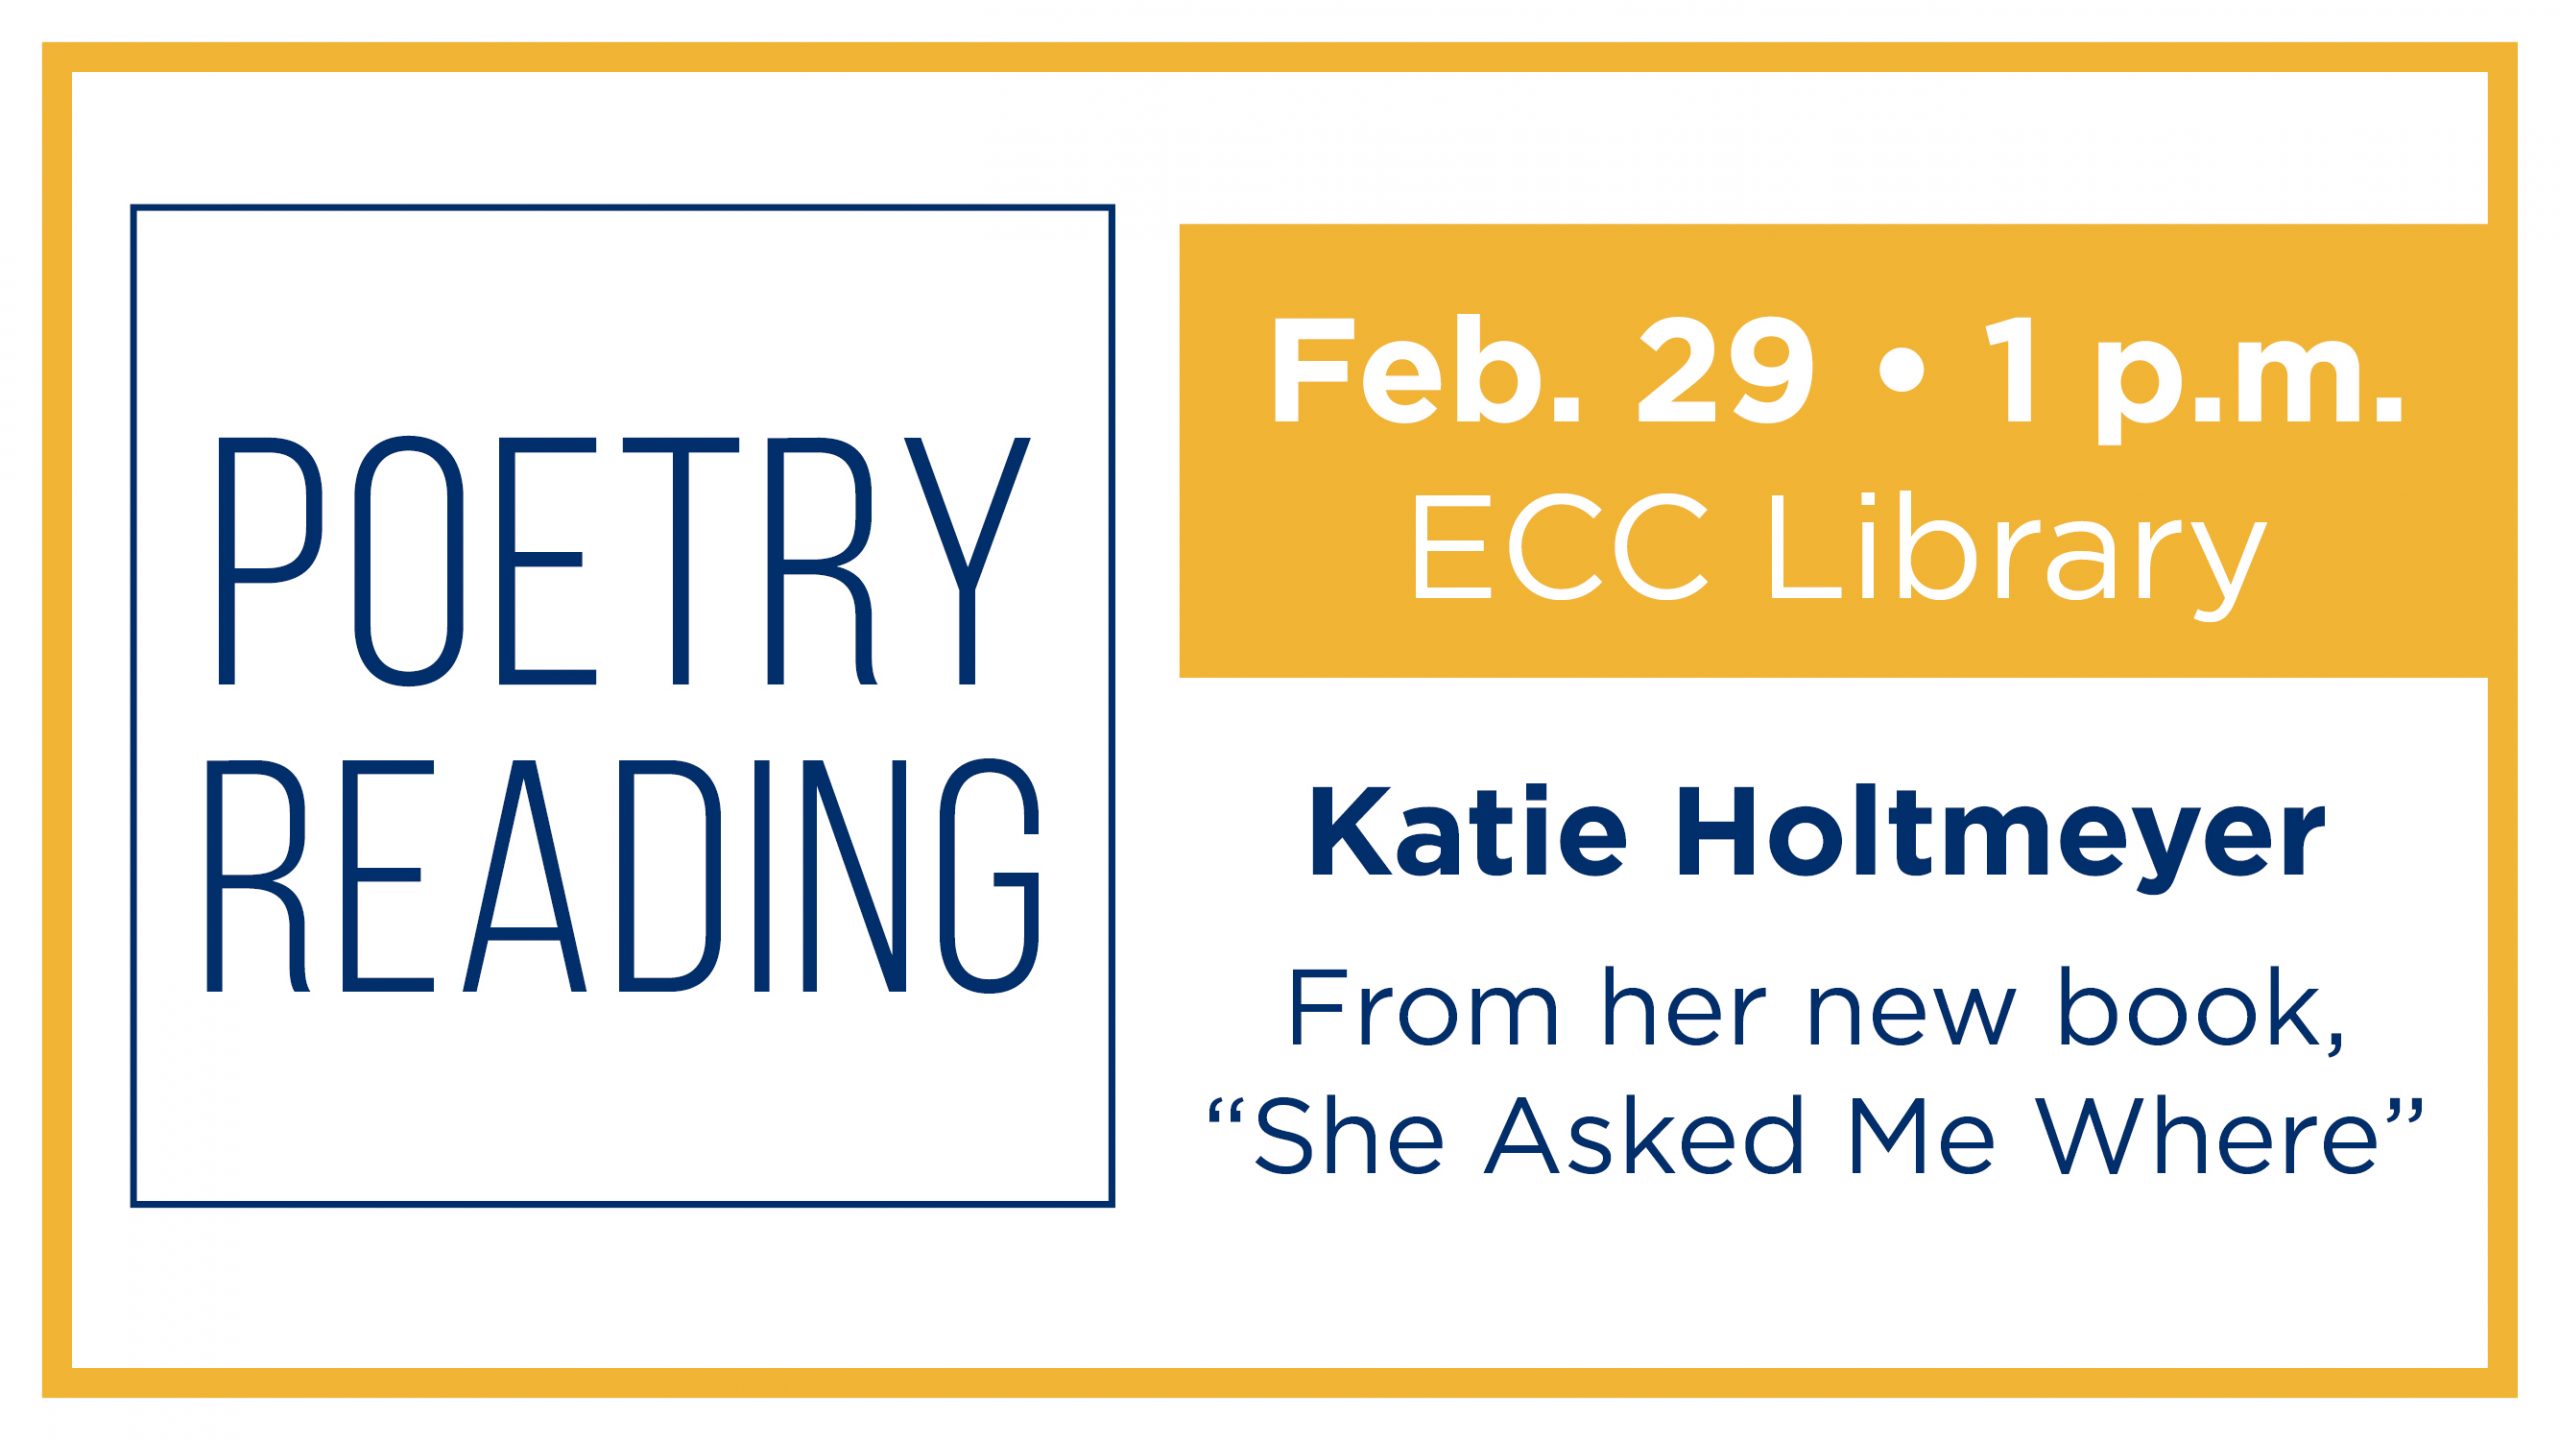 Poetry Reading - Katie Holtmeyer